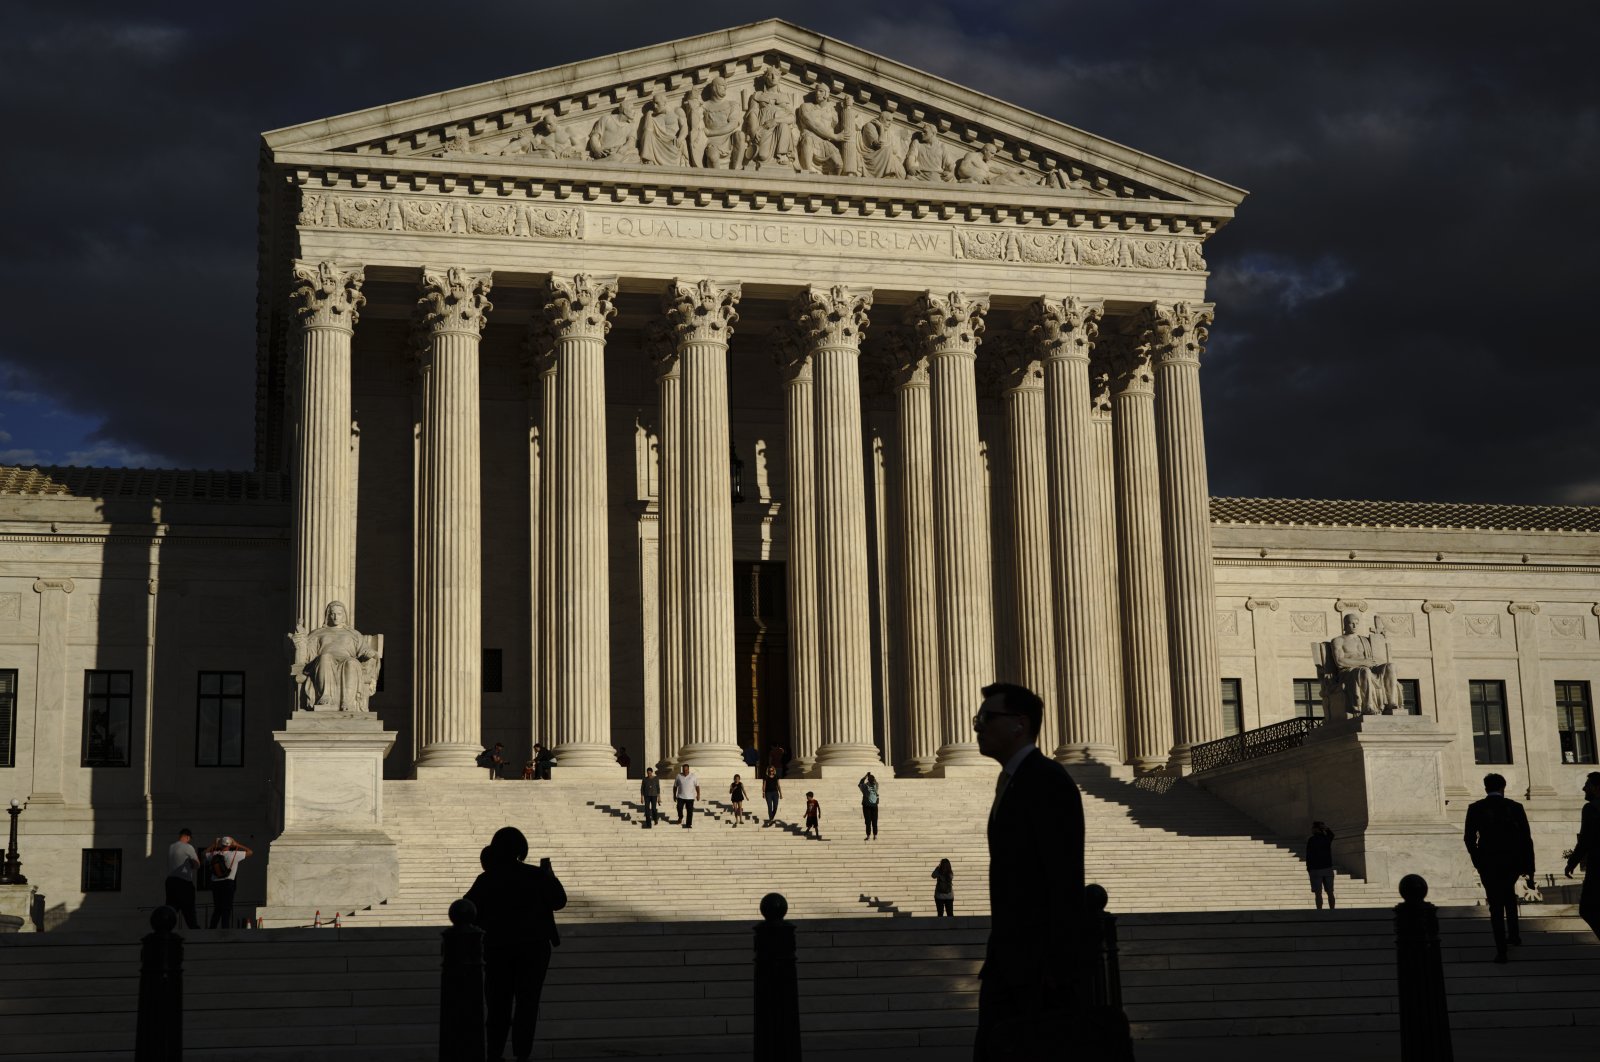 The U.S. Supreme Court is seen at dusk on Oct. 22, 2021, in Washington, D.C., U.S. (AP Photo)